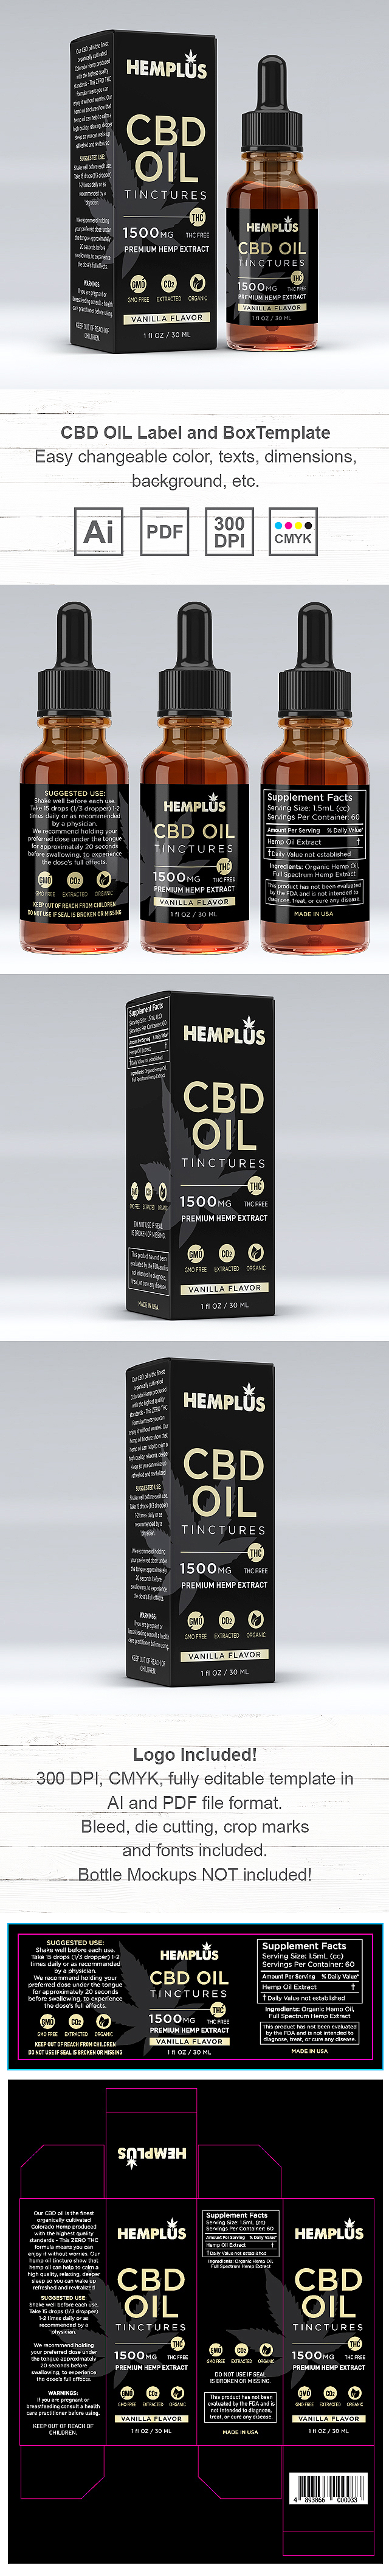 CBD OIL Supplement Label and Box Template